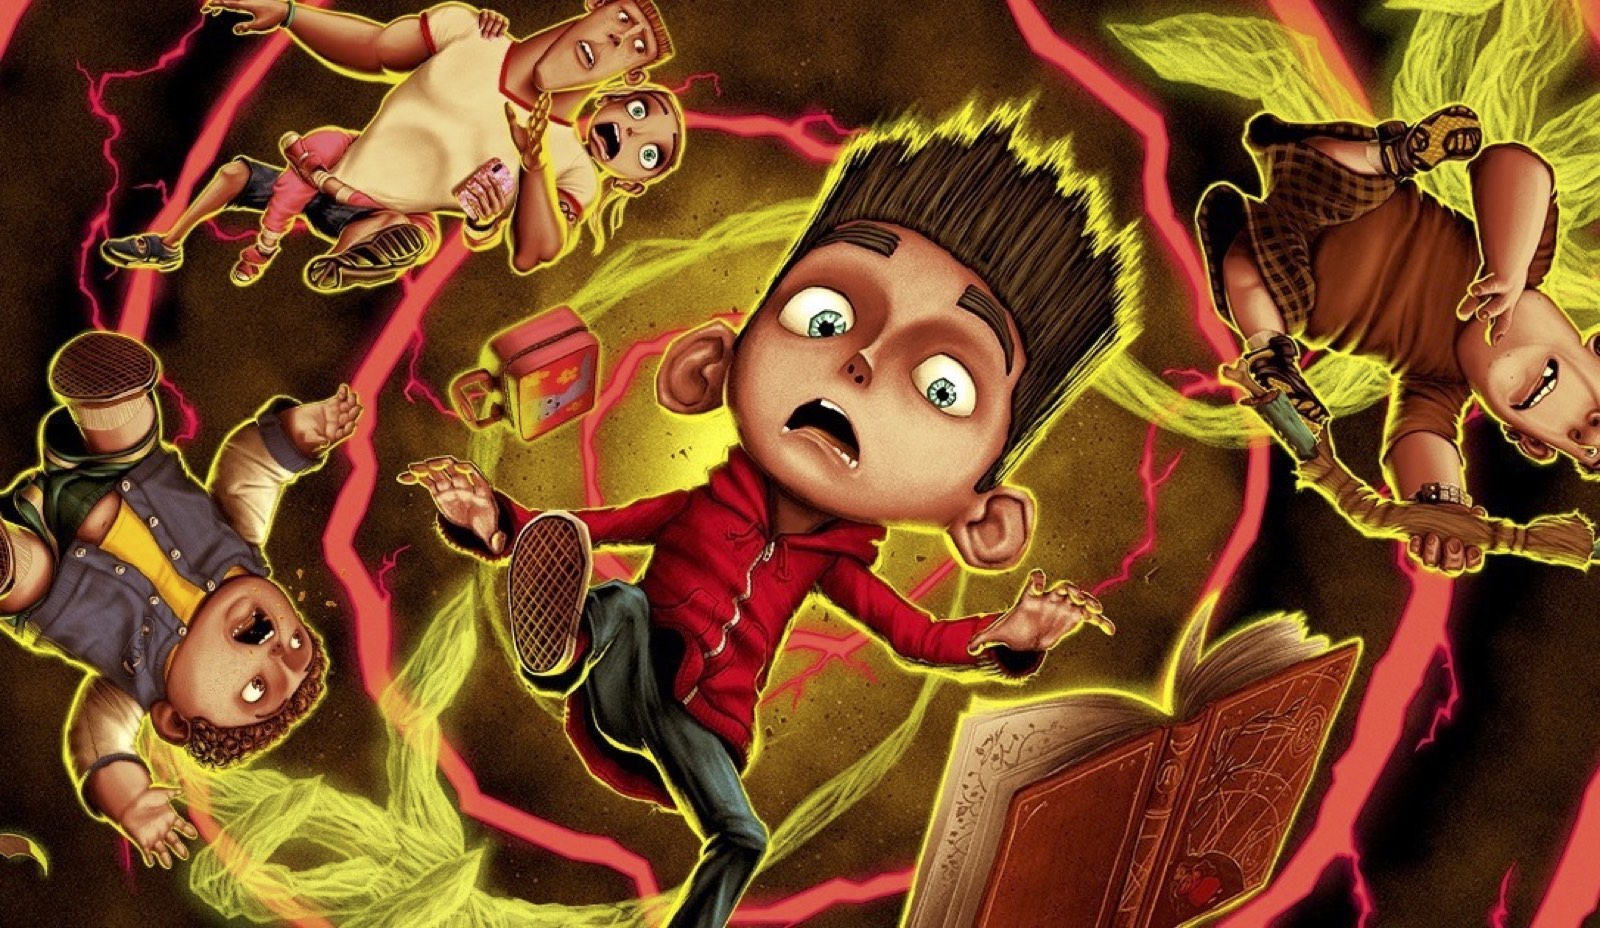 ParaNorman rises back to the big screen in 4K this Halloween